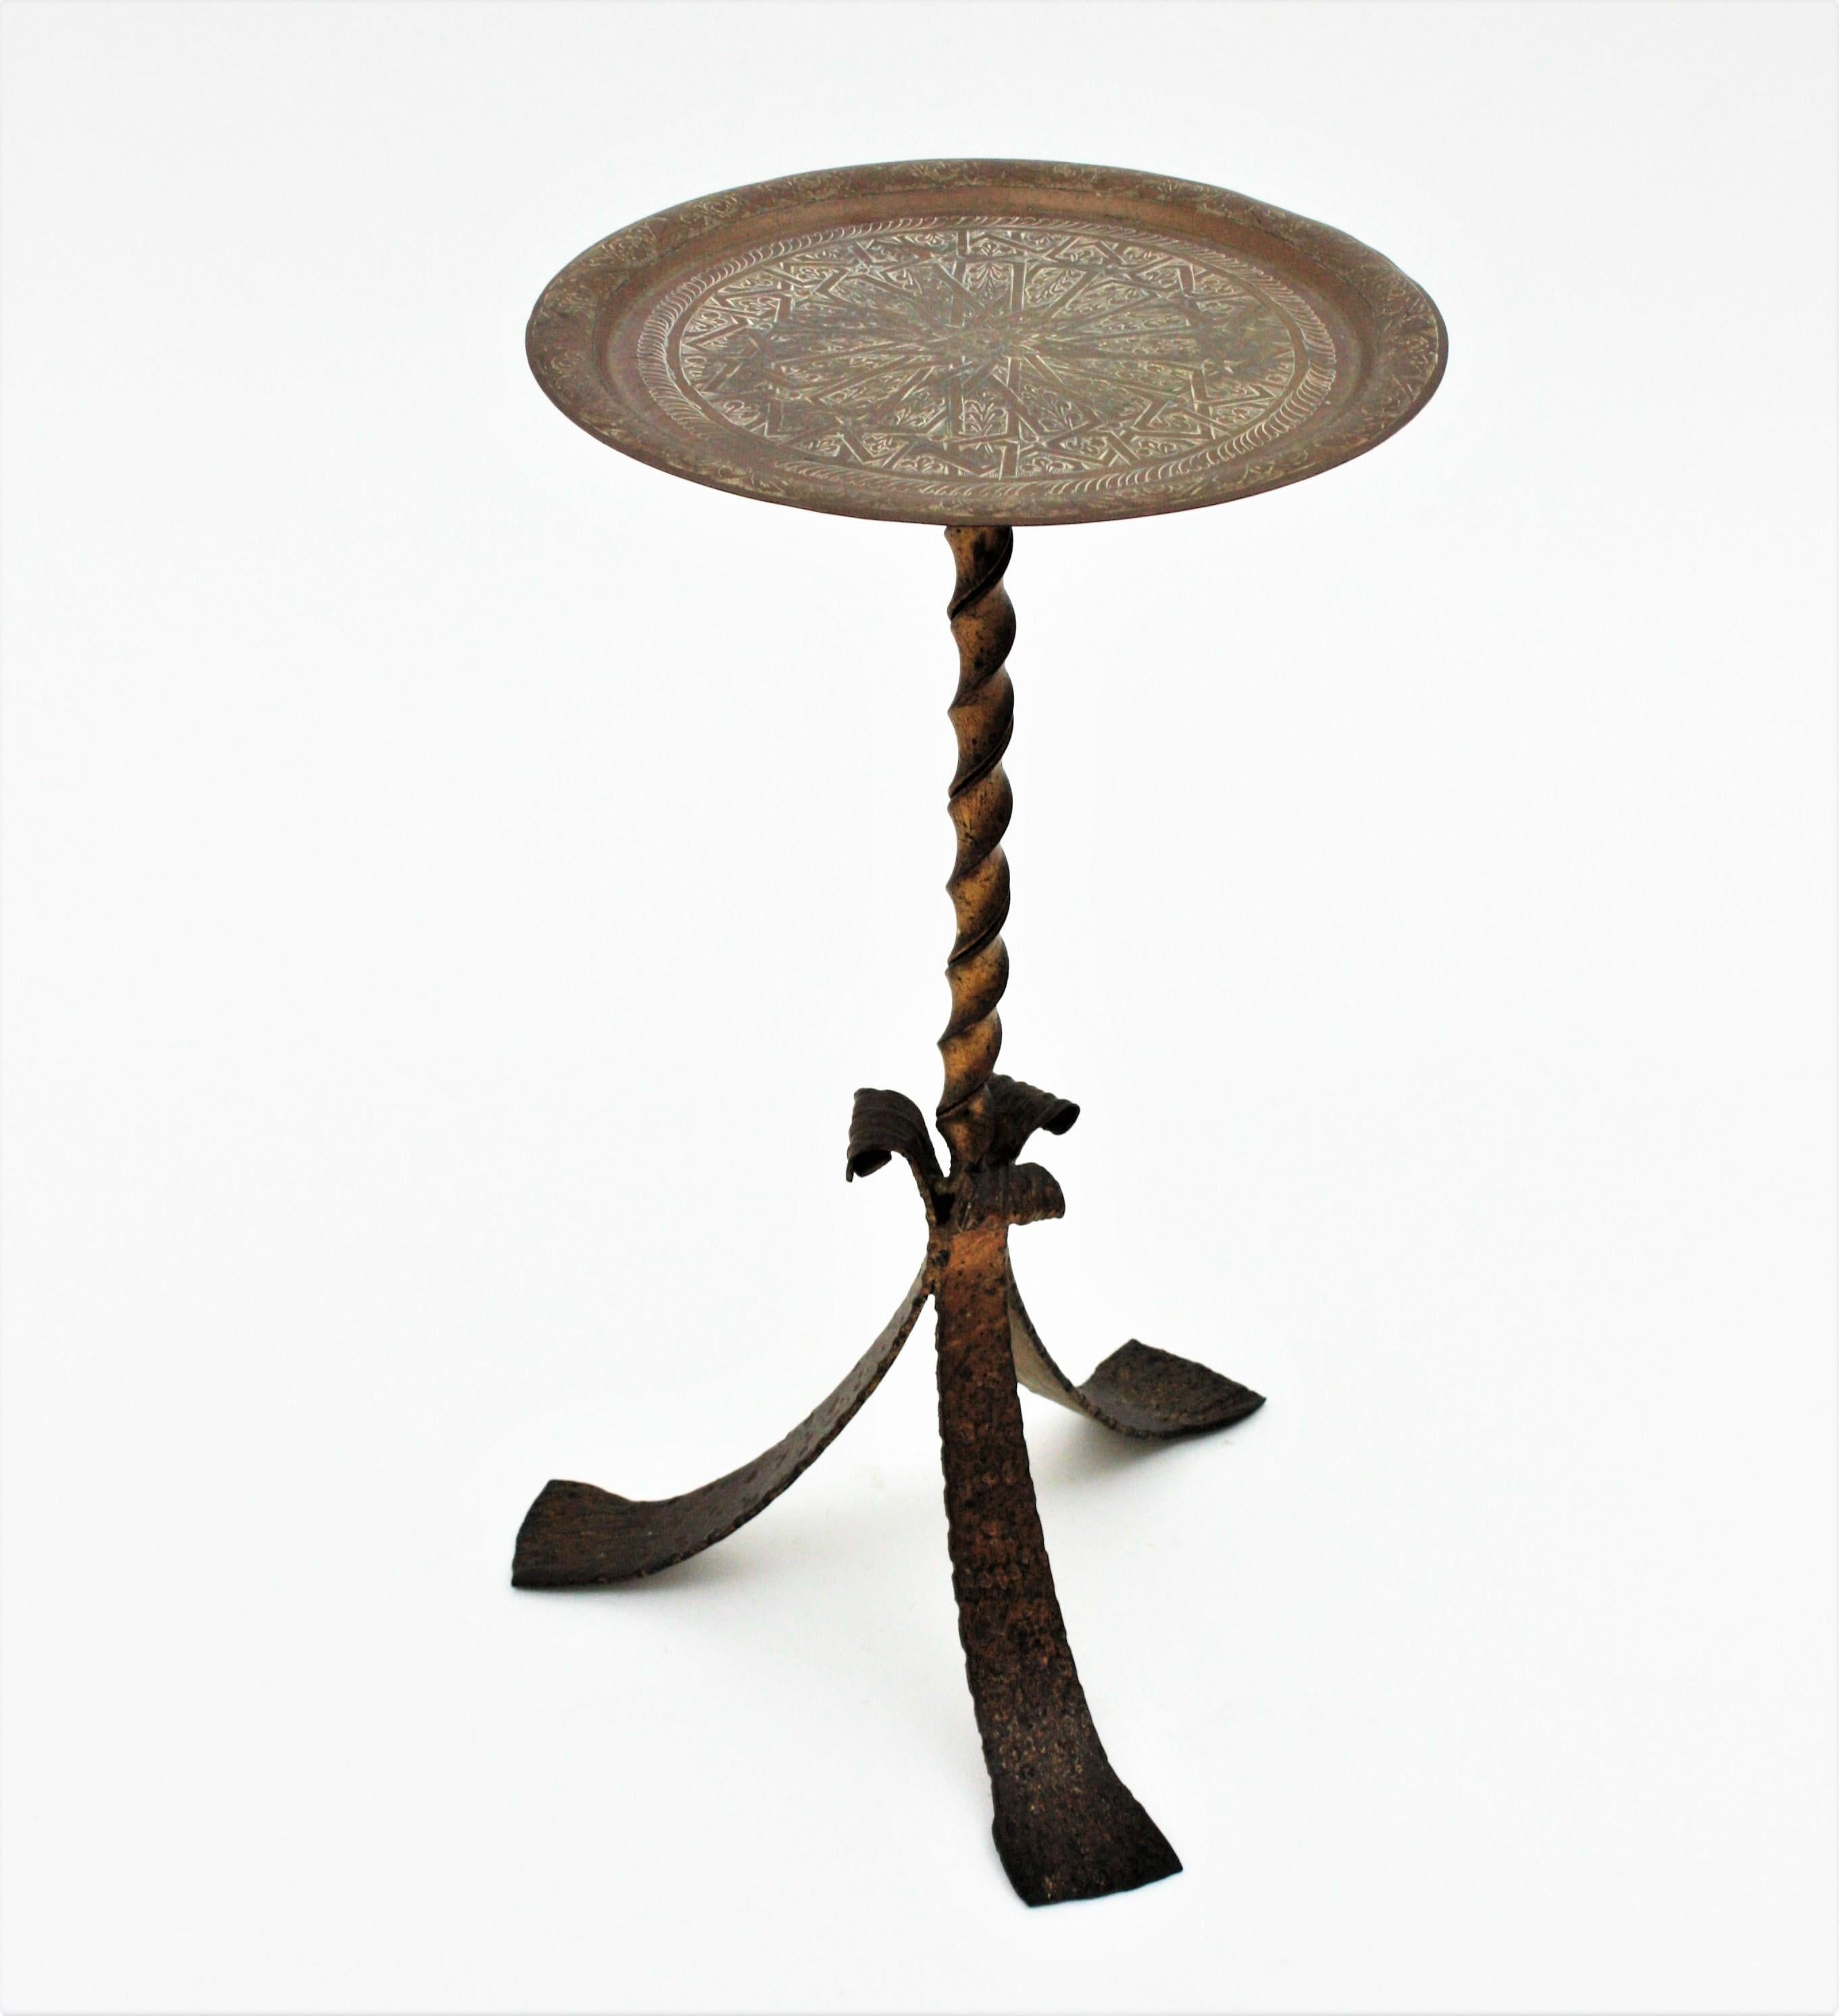 Spanish Drinks Table
Gilt Iron Guéridon end / side table or stand with twisted tripod base and brass top. Spain, 1950s
A wrought iron side table or pedestal finished in gold leaf gilding holding a top with andalusian decorations.
This eye-catching